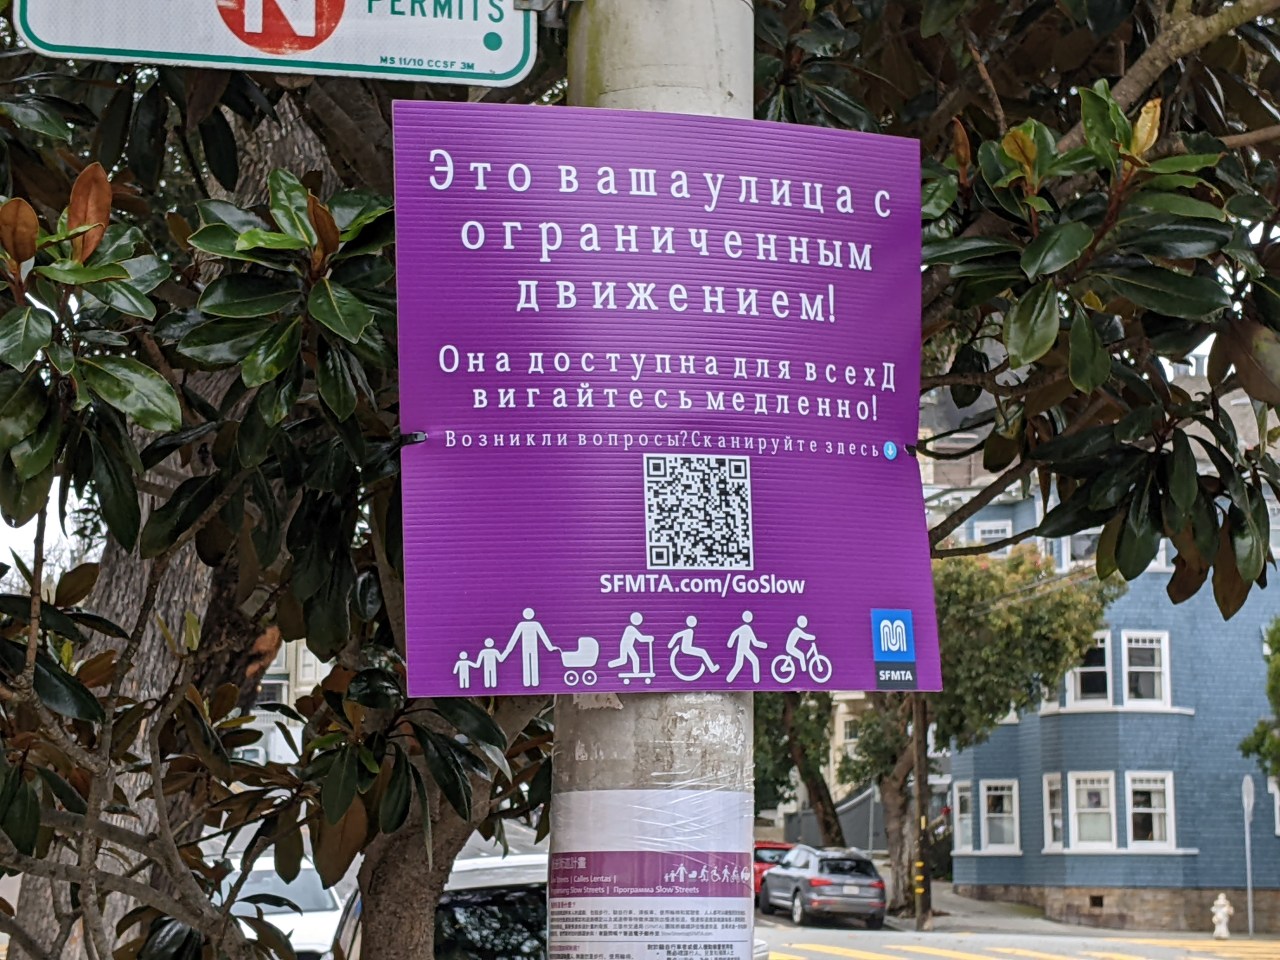 An example of one of the SFMTA signs, attached to a telephone pole, that wouldn't really be visible from the street. Photo: Streetsblog/Rudick